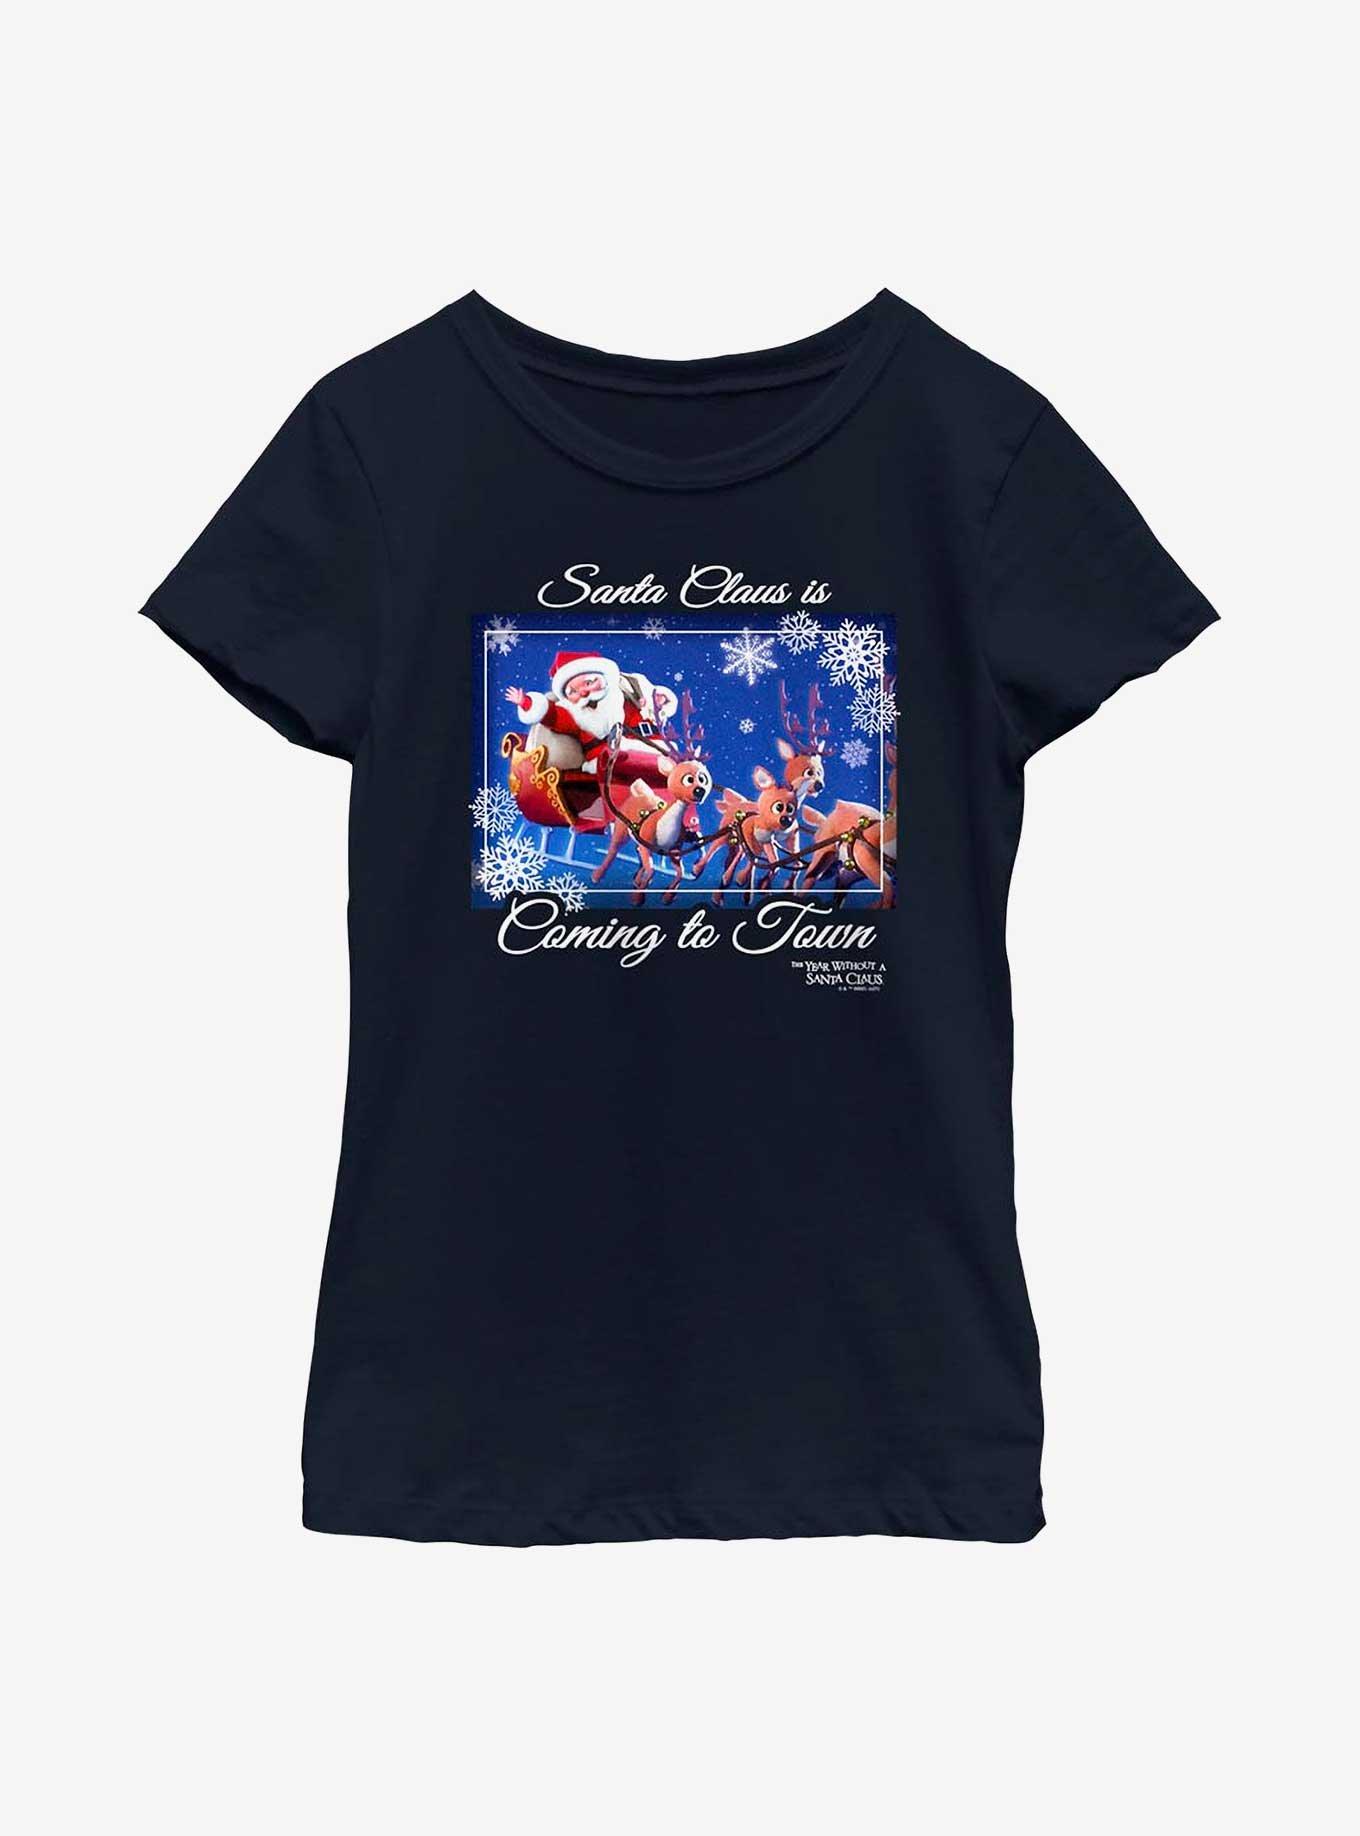 The Year Without Santa Claus Coming To Town Youth Girls T-Shirt, NAVY, hi-res